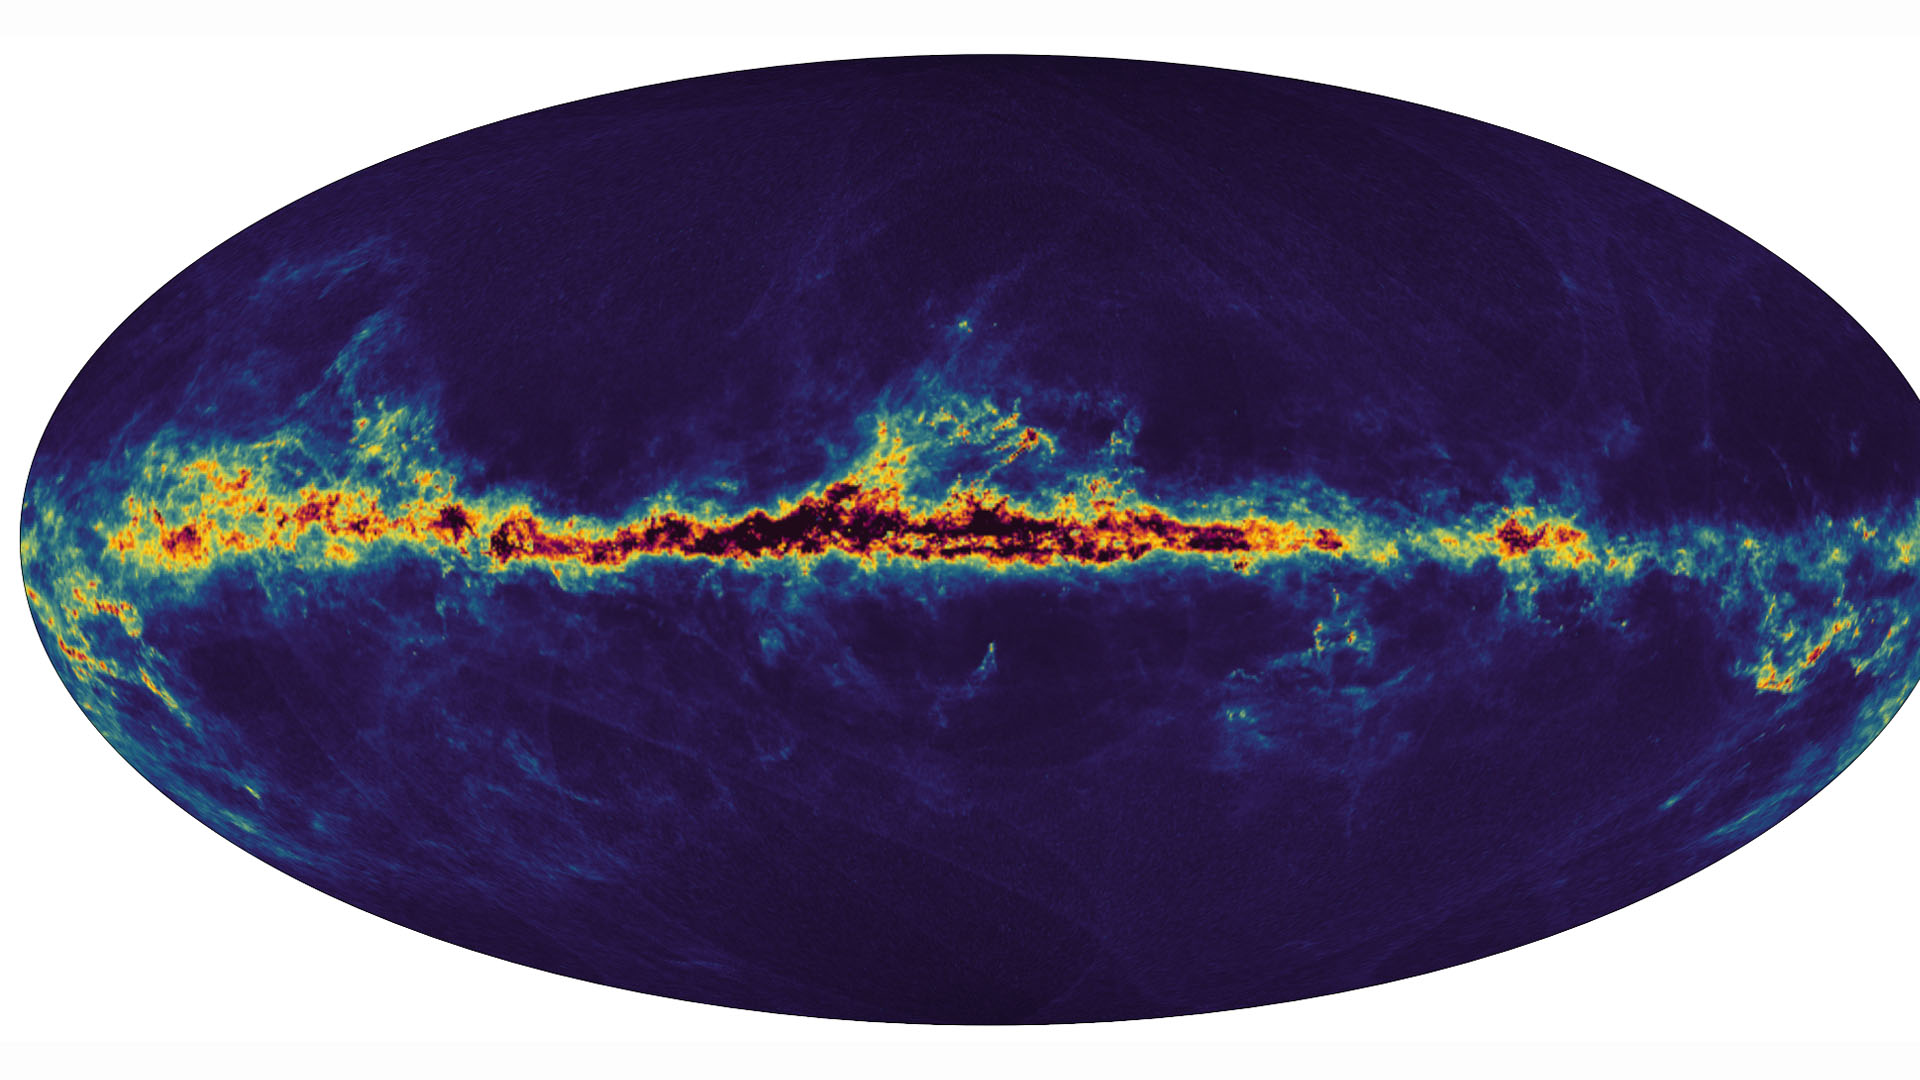 A map showing the distribution of interstellar dust in our galaxy, the Milky Way, based on measurements by the European Gaia mission.